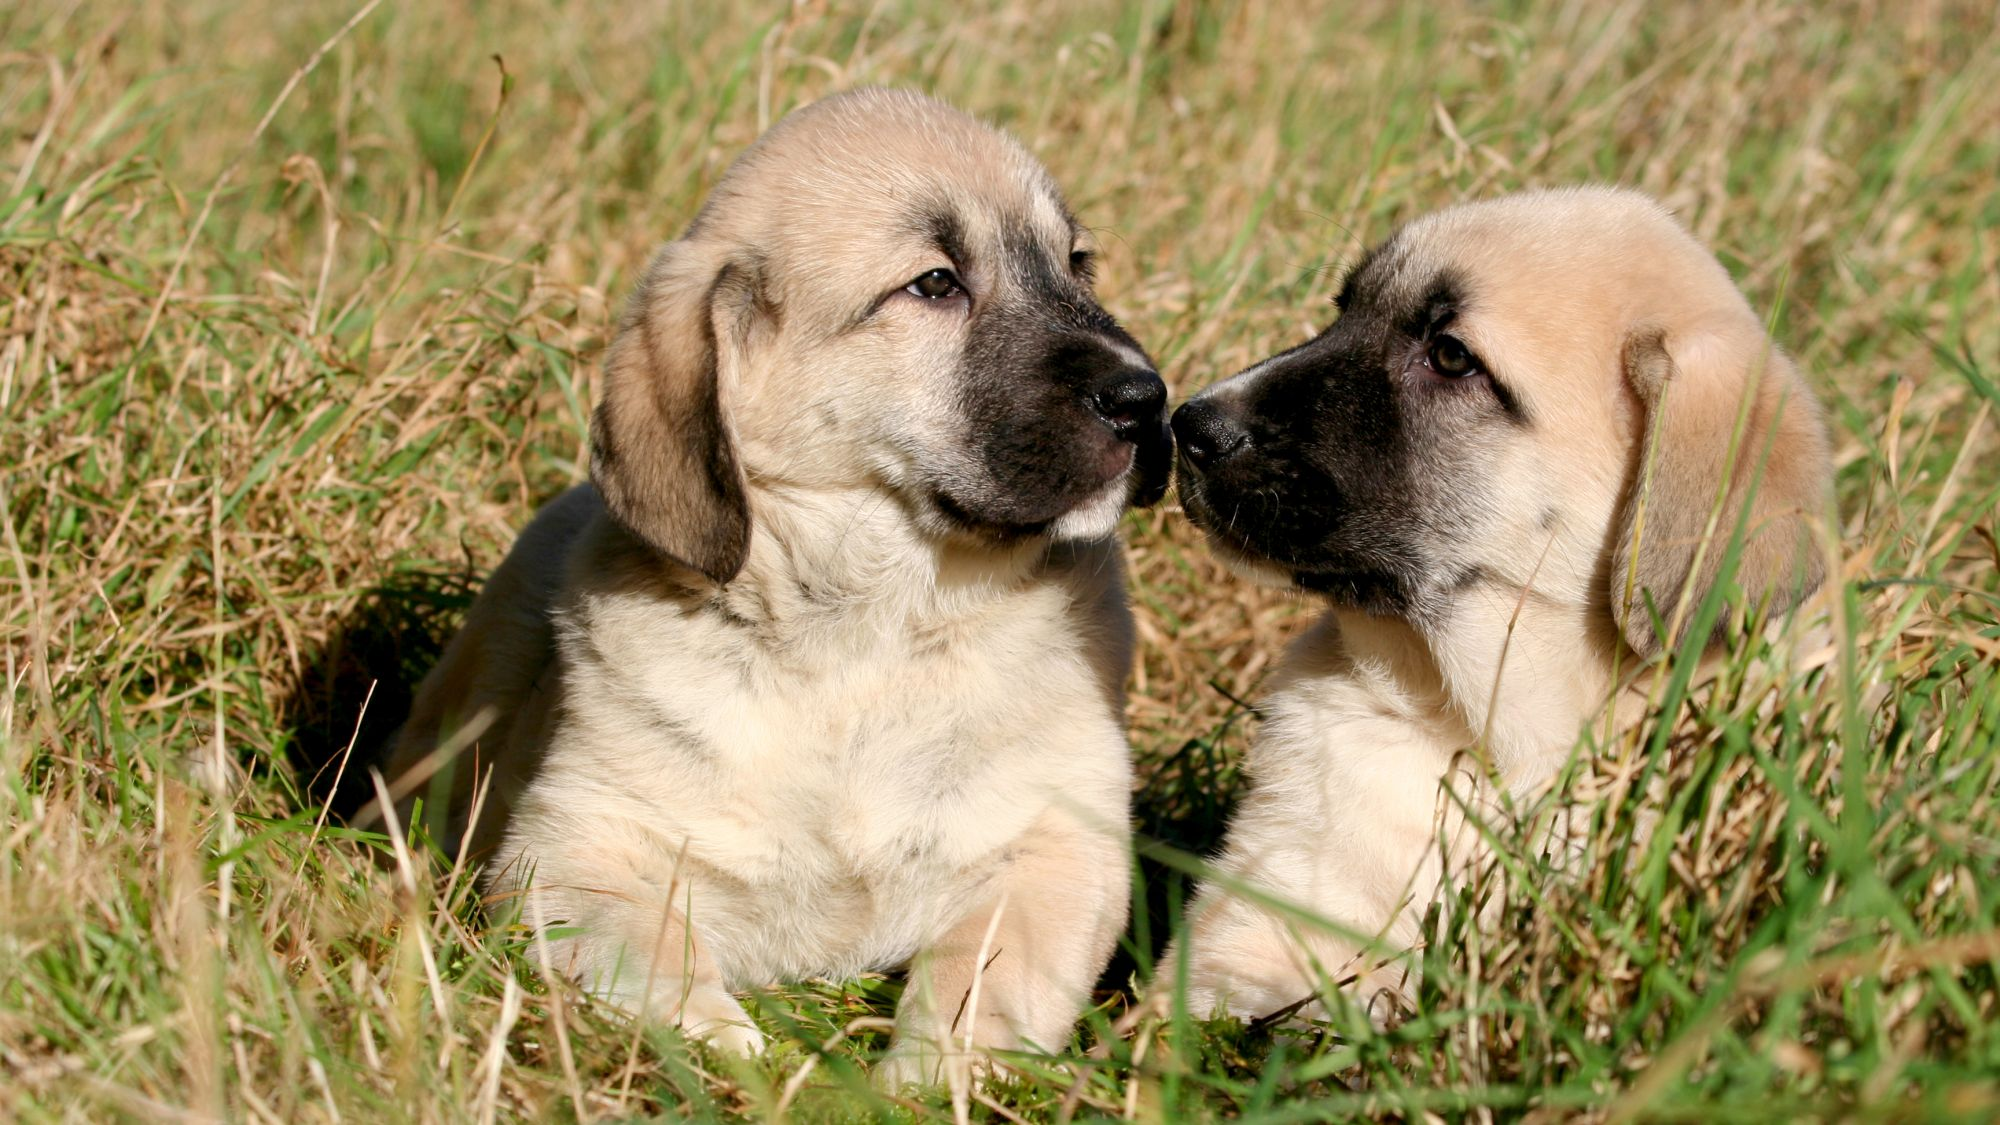 Two Anatolian Shepherd puppies with their noses touching